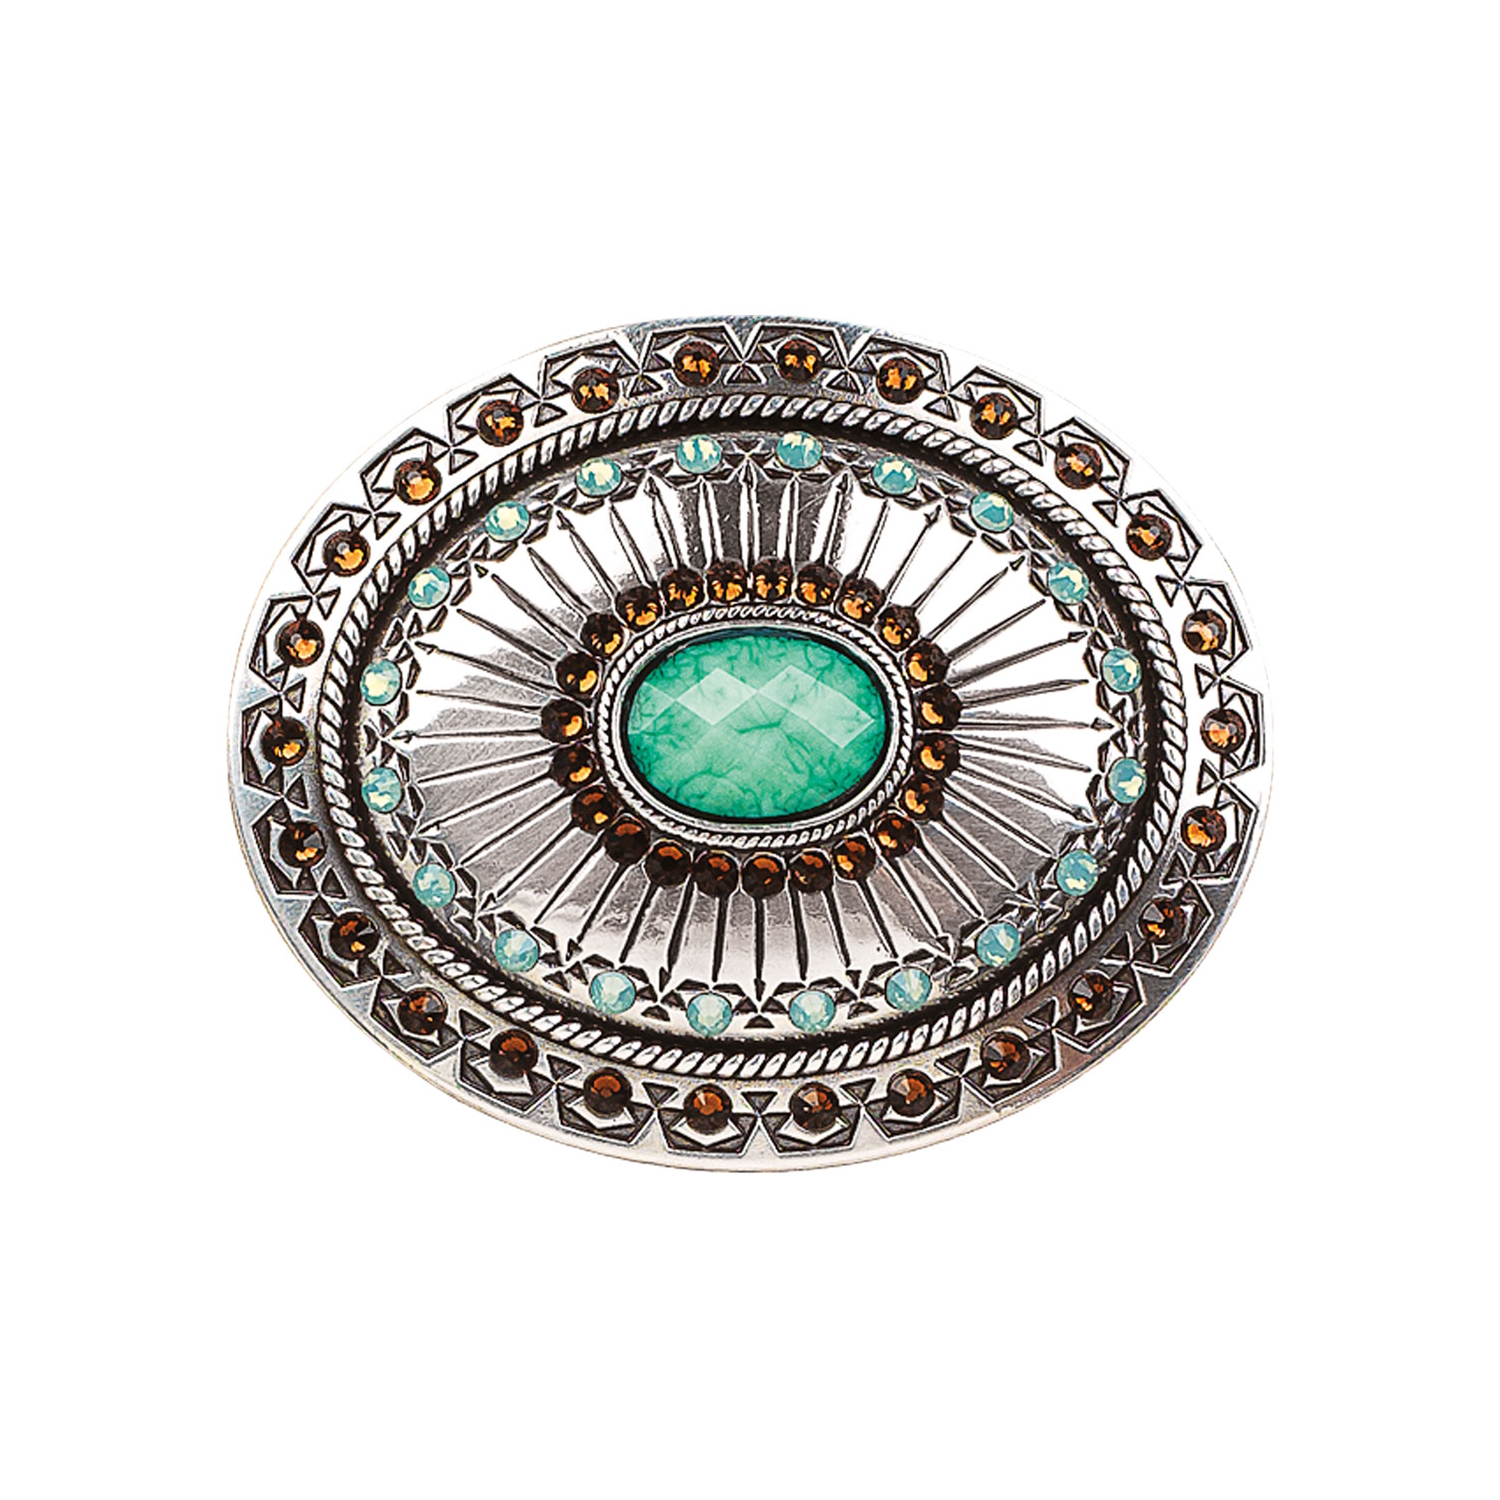 MF-37975 Belt Buckle Oval Cross with Turquoise Stone